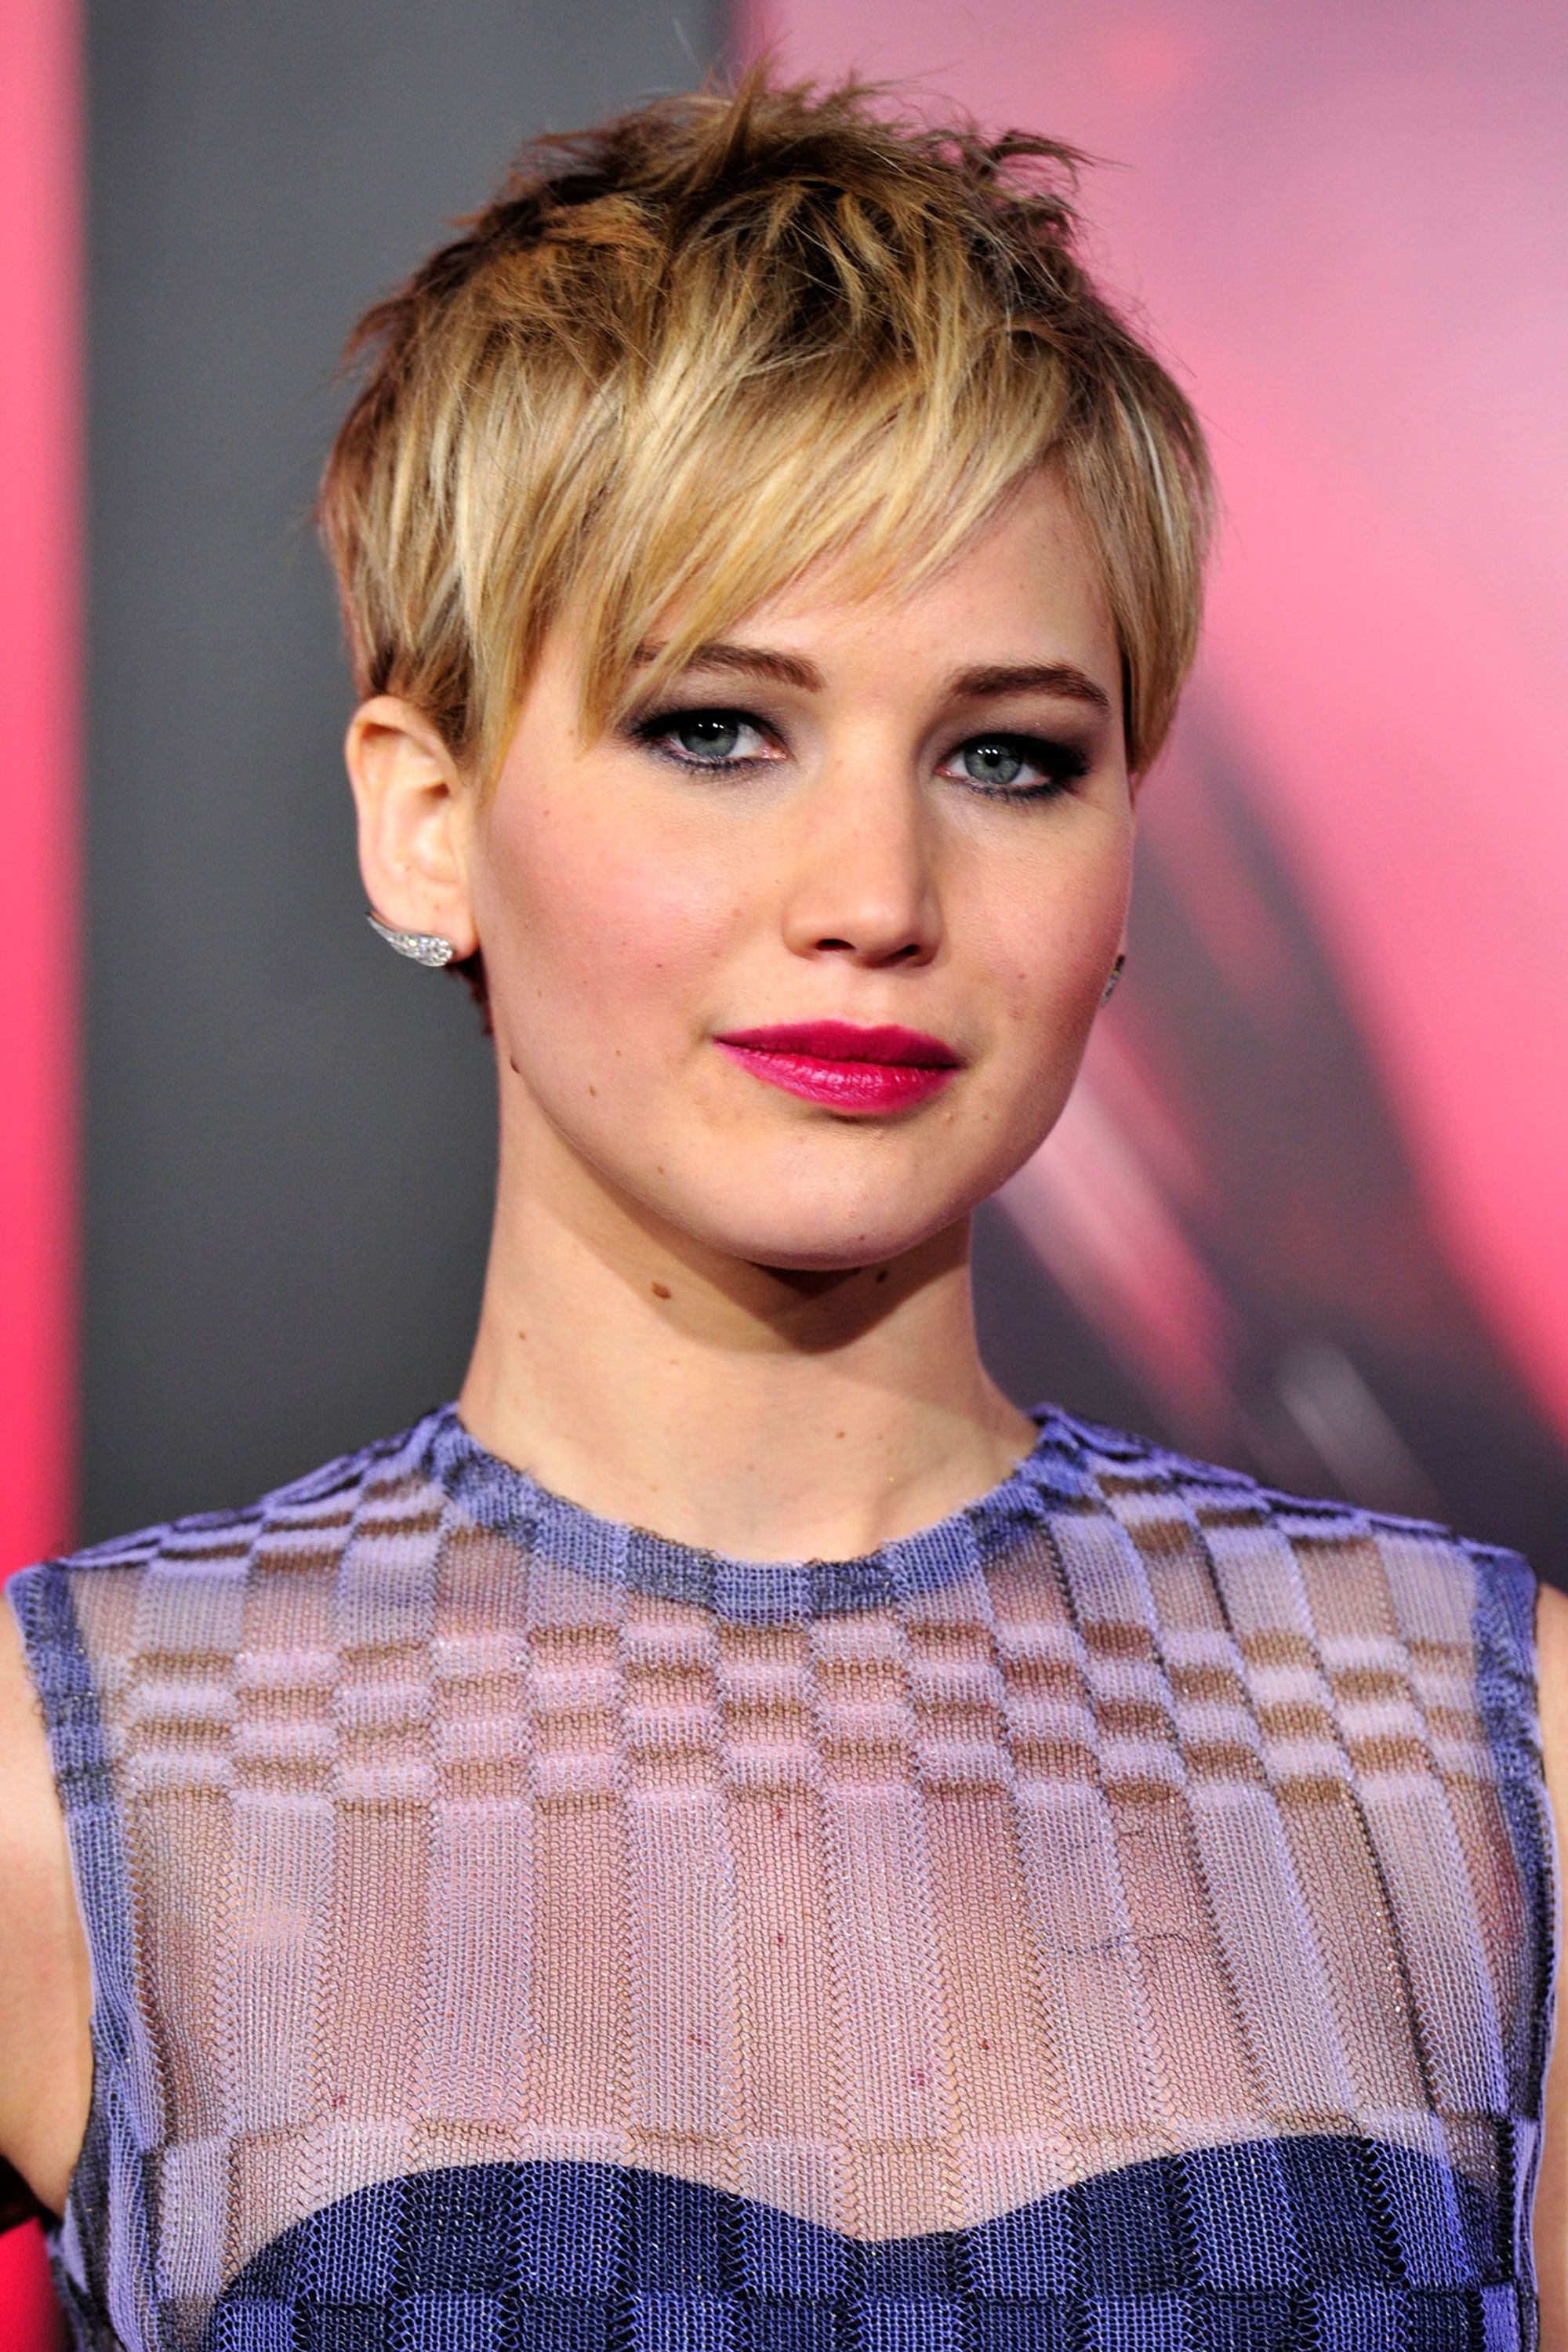 15 Stylish Celebrity Short Hairstyles Ideas for Women  Wittyduck